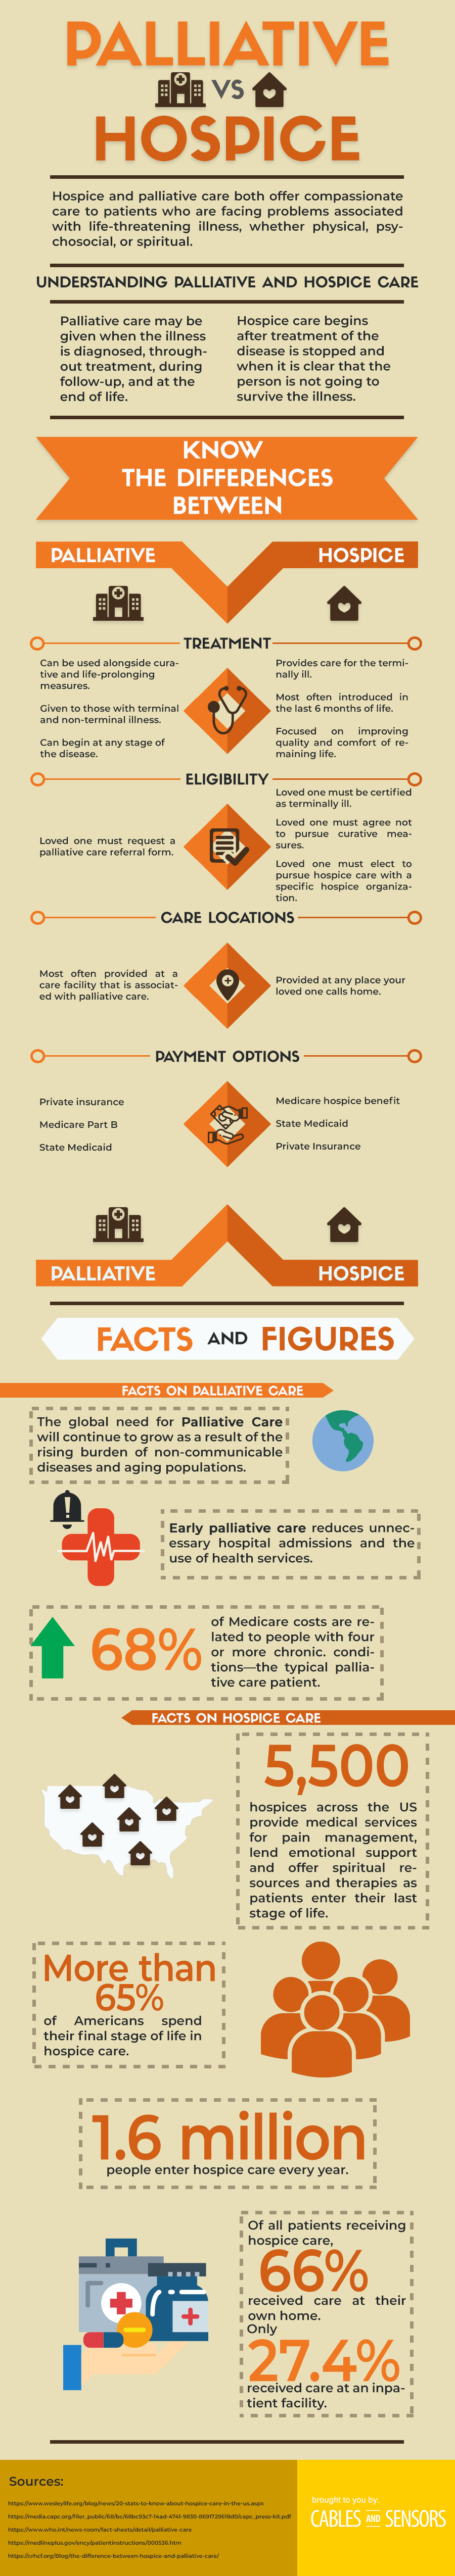 Difference Between Palliative and Hospice Care- INFOGRAPHICS